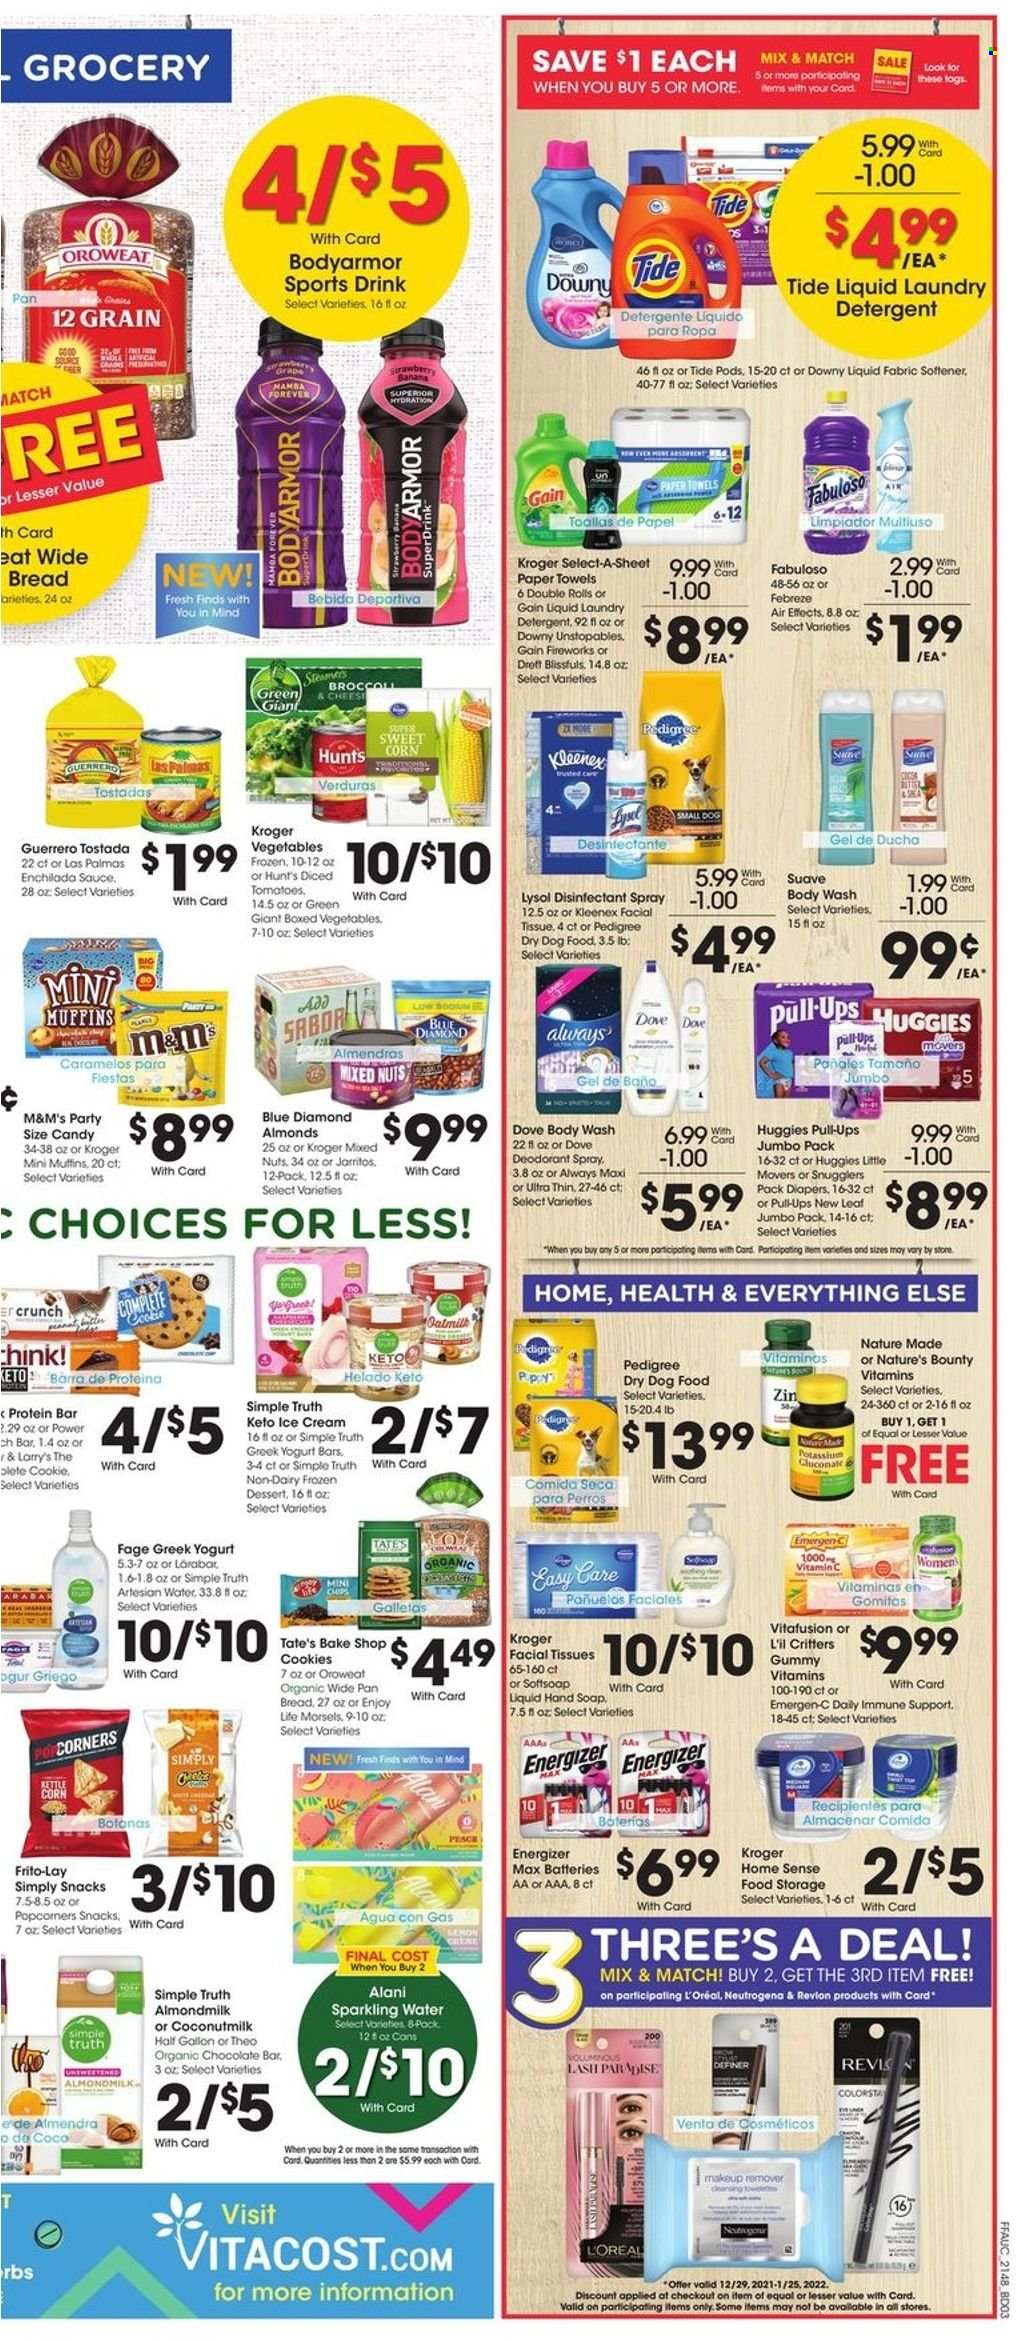 thumbnail - Fry’s Flyer - 12/29/2021 - 01/04/2022 - Sales products - tostadas, muffin, corn, tomatoes, cheese, greek yoghurt, almond milk, ice cream, Enlightened lce Cream, cookies, snack, M&M's, chocolate bar, popcorn, Frito-Lay, coconut milk, enchilada sauce, protein bar, mixed nuts, Blue Diamond, sparkling water, Huggies, nappies, Dove, Kleenex, tissues, kitchen towels, paper towels, detergent, Febreze, Gain, desinfection, Lysol, Fabuloso, Tide, Unstopables, fabric softener, laundry detergent, Gain Fireworks, Downy Laundry, body wash, Softsoap, Suave, hand soap, soap, facial tissues, L’Oréal, Neutrogena, anti-perspirant, deodorant, antibacterial spray, pan, battery, Energizer, animal food, dog food, Pedigree, dry dog food, Nature Made, Nature's Bounty, Vitafusion, vitamin c, Emergen-C. Page 6.